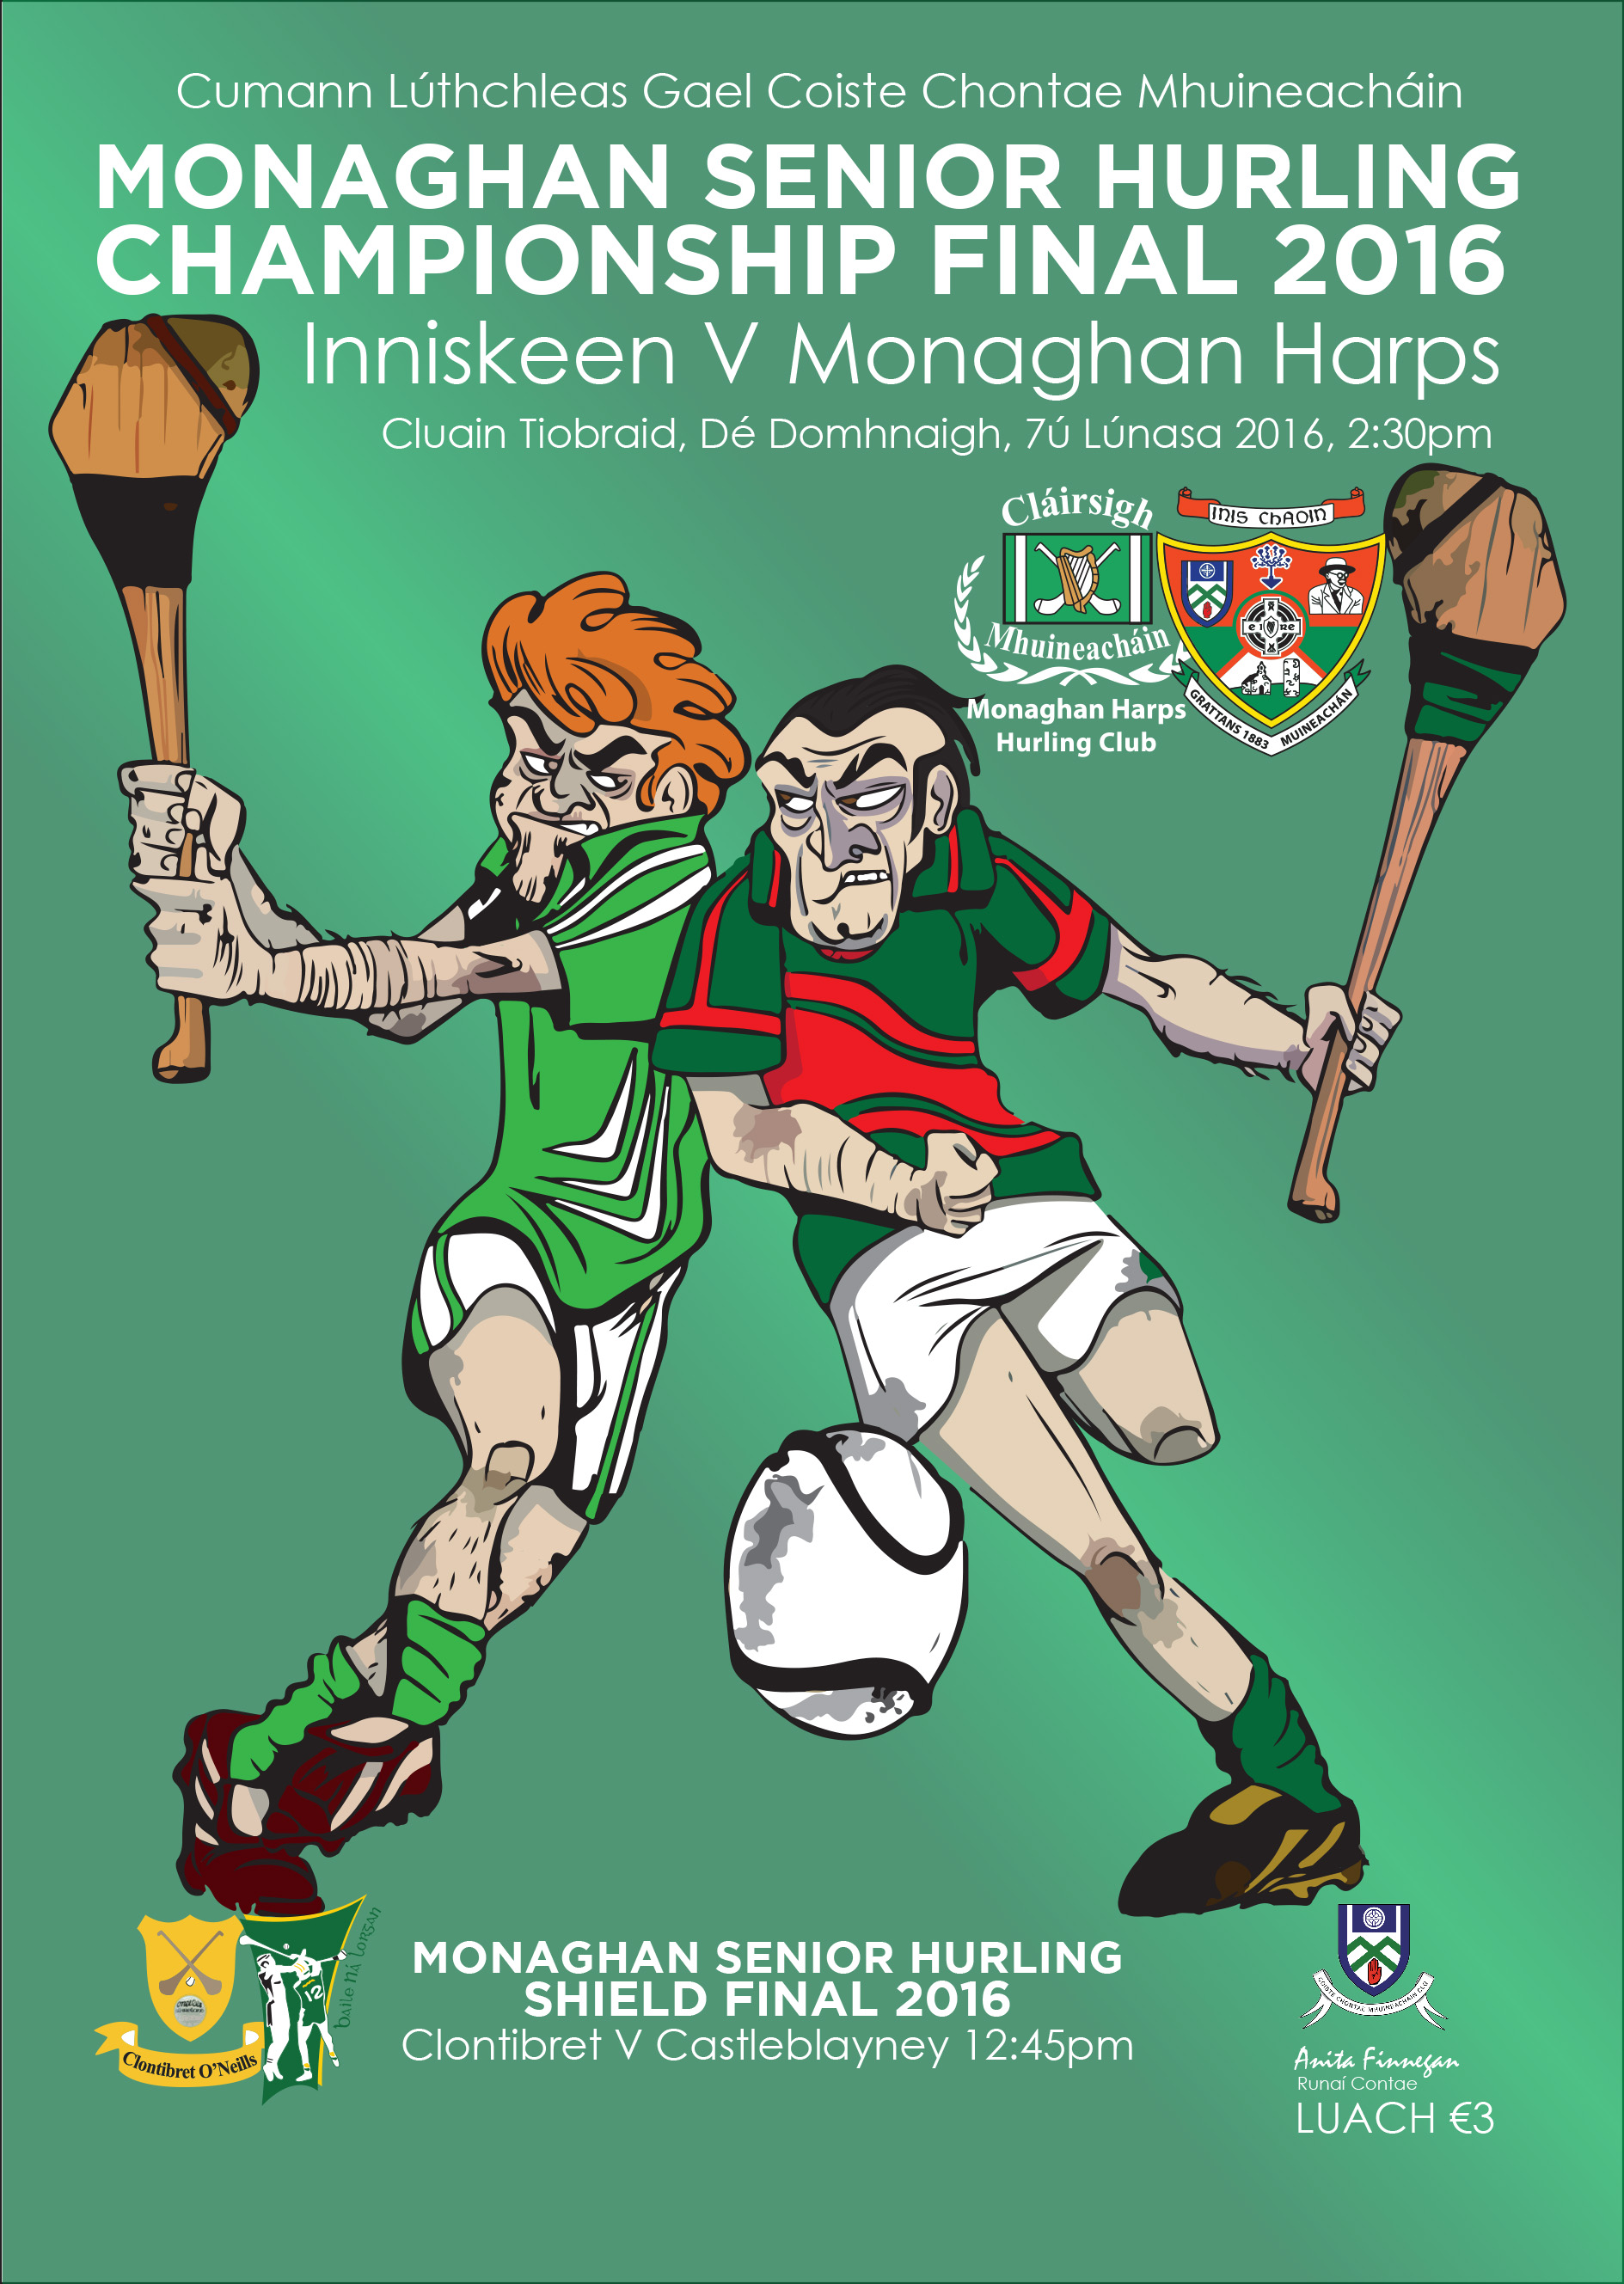 Hurling Final Programme wins Programme of the Month for August